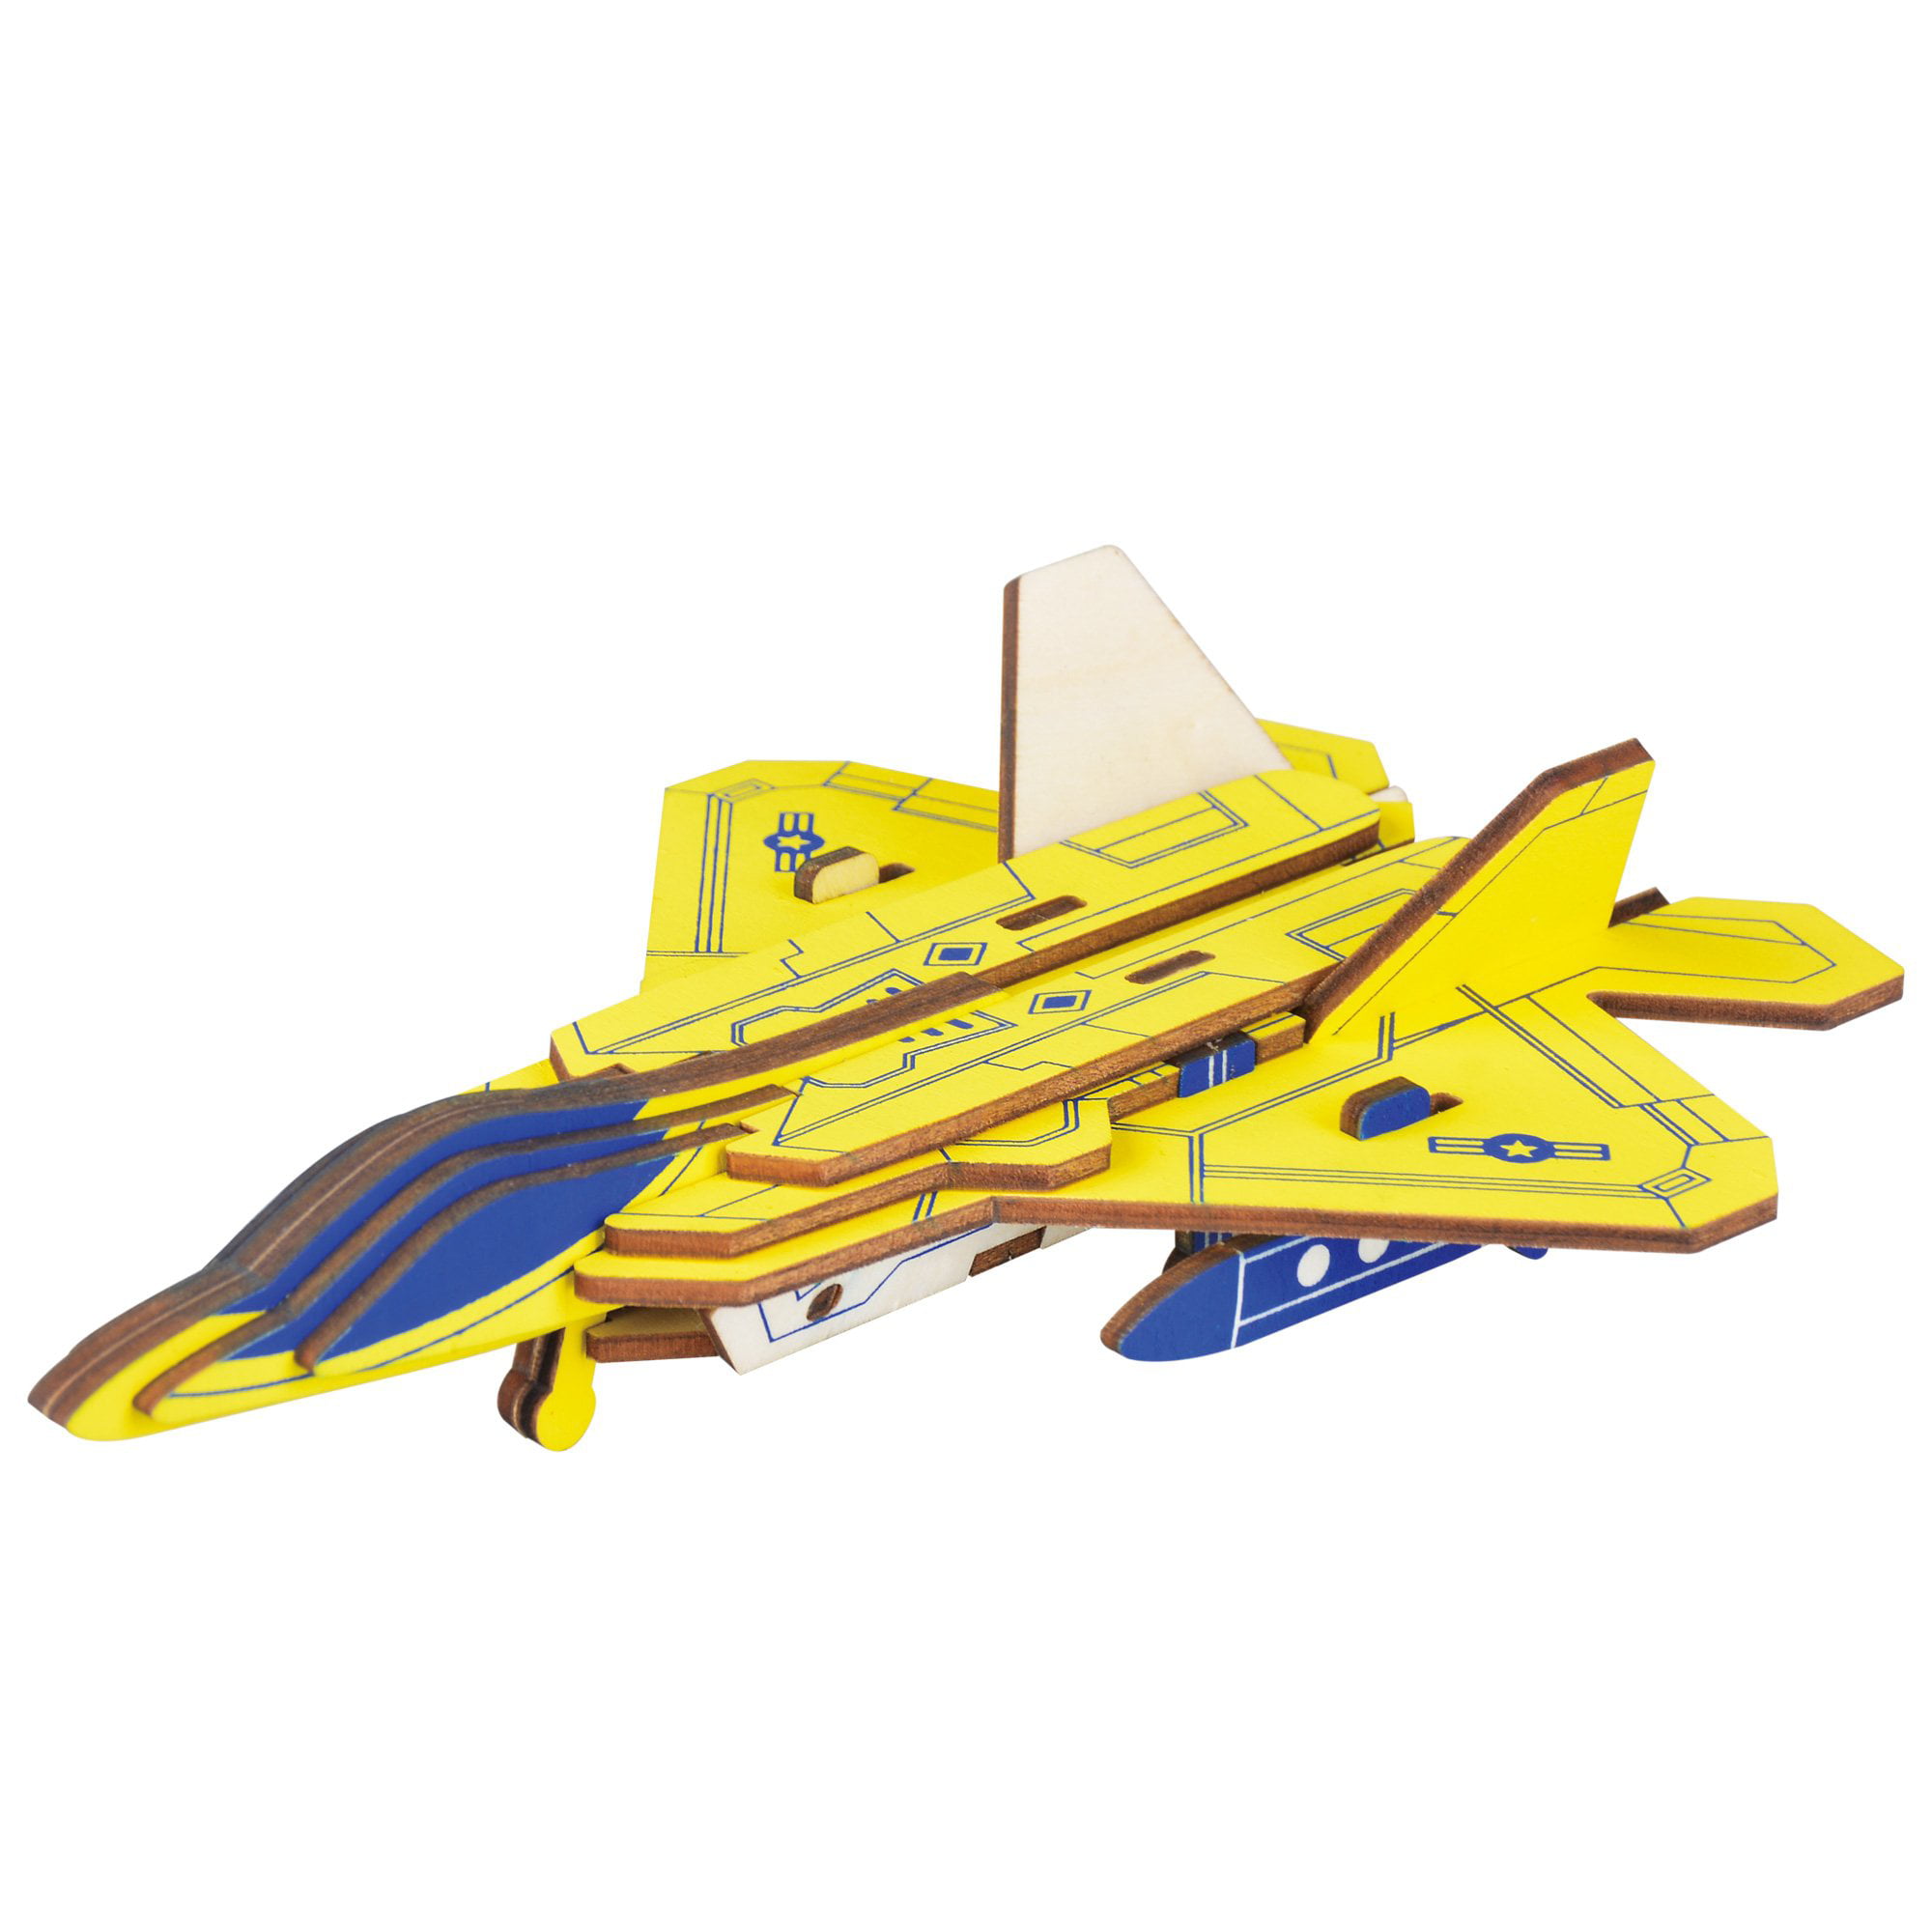 Kids Play DIY 3D Wooden Fighter Aircraft Plane Model Construction Puzzle Kit 